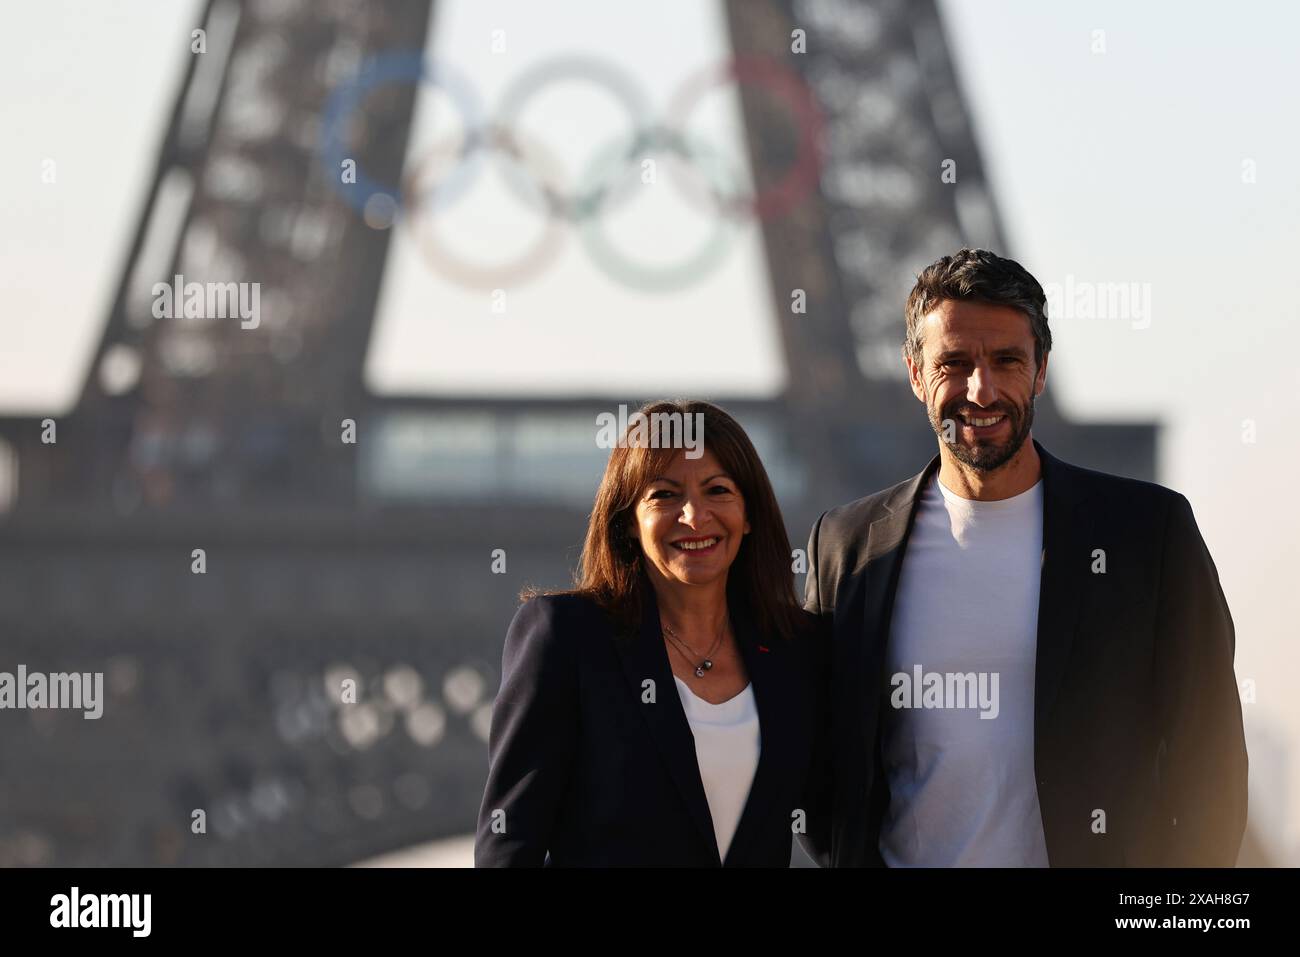 Paris, France. 7th June, 2024. President of the Paris 2024 Olympic Games Organizing Committee Tony Estanguet (R) and Paris Mayor Anne Hidalgo pose with the Olympic rings on the Eiffel Tower, in Paris, France, on June 7, 2024. The Olympics rings are unveiled on the Eiffel Tower early in the morning of Friday as the French capital marks 50 days until the start of the upcoming Paris 2024 Olympic Games. Credit: Gao Jing/Xinhua/Alamy Live News Stock Photo